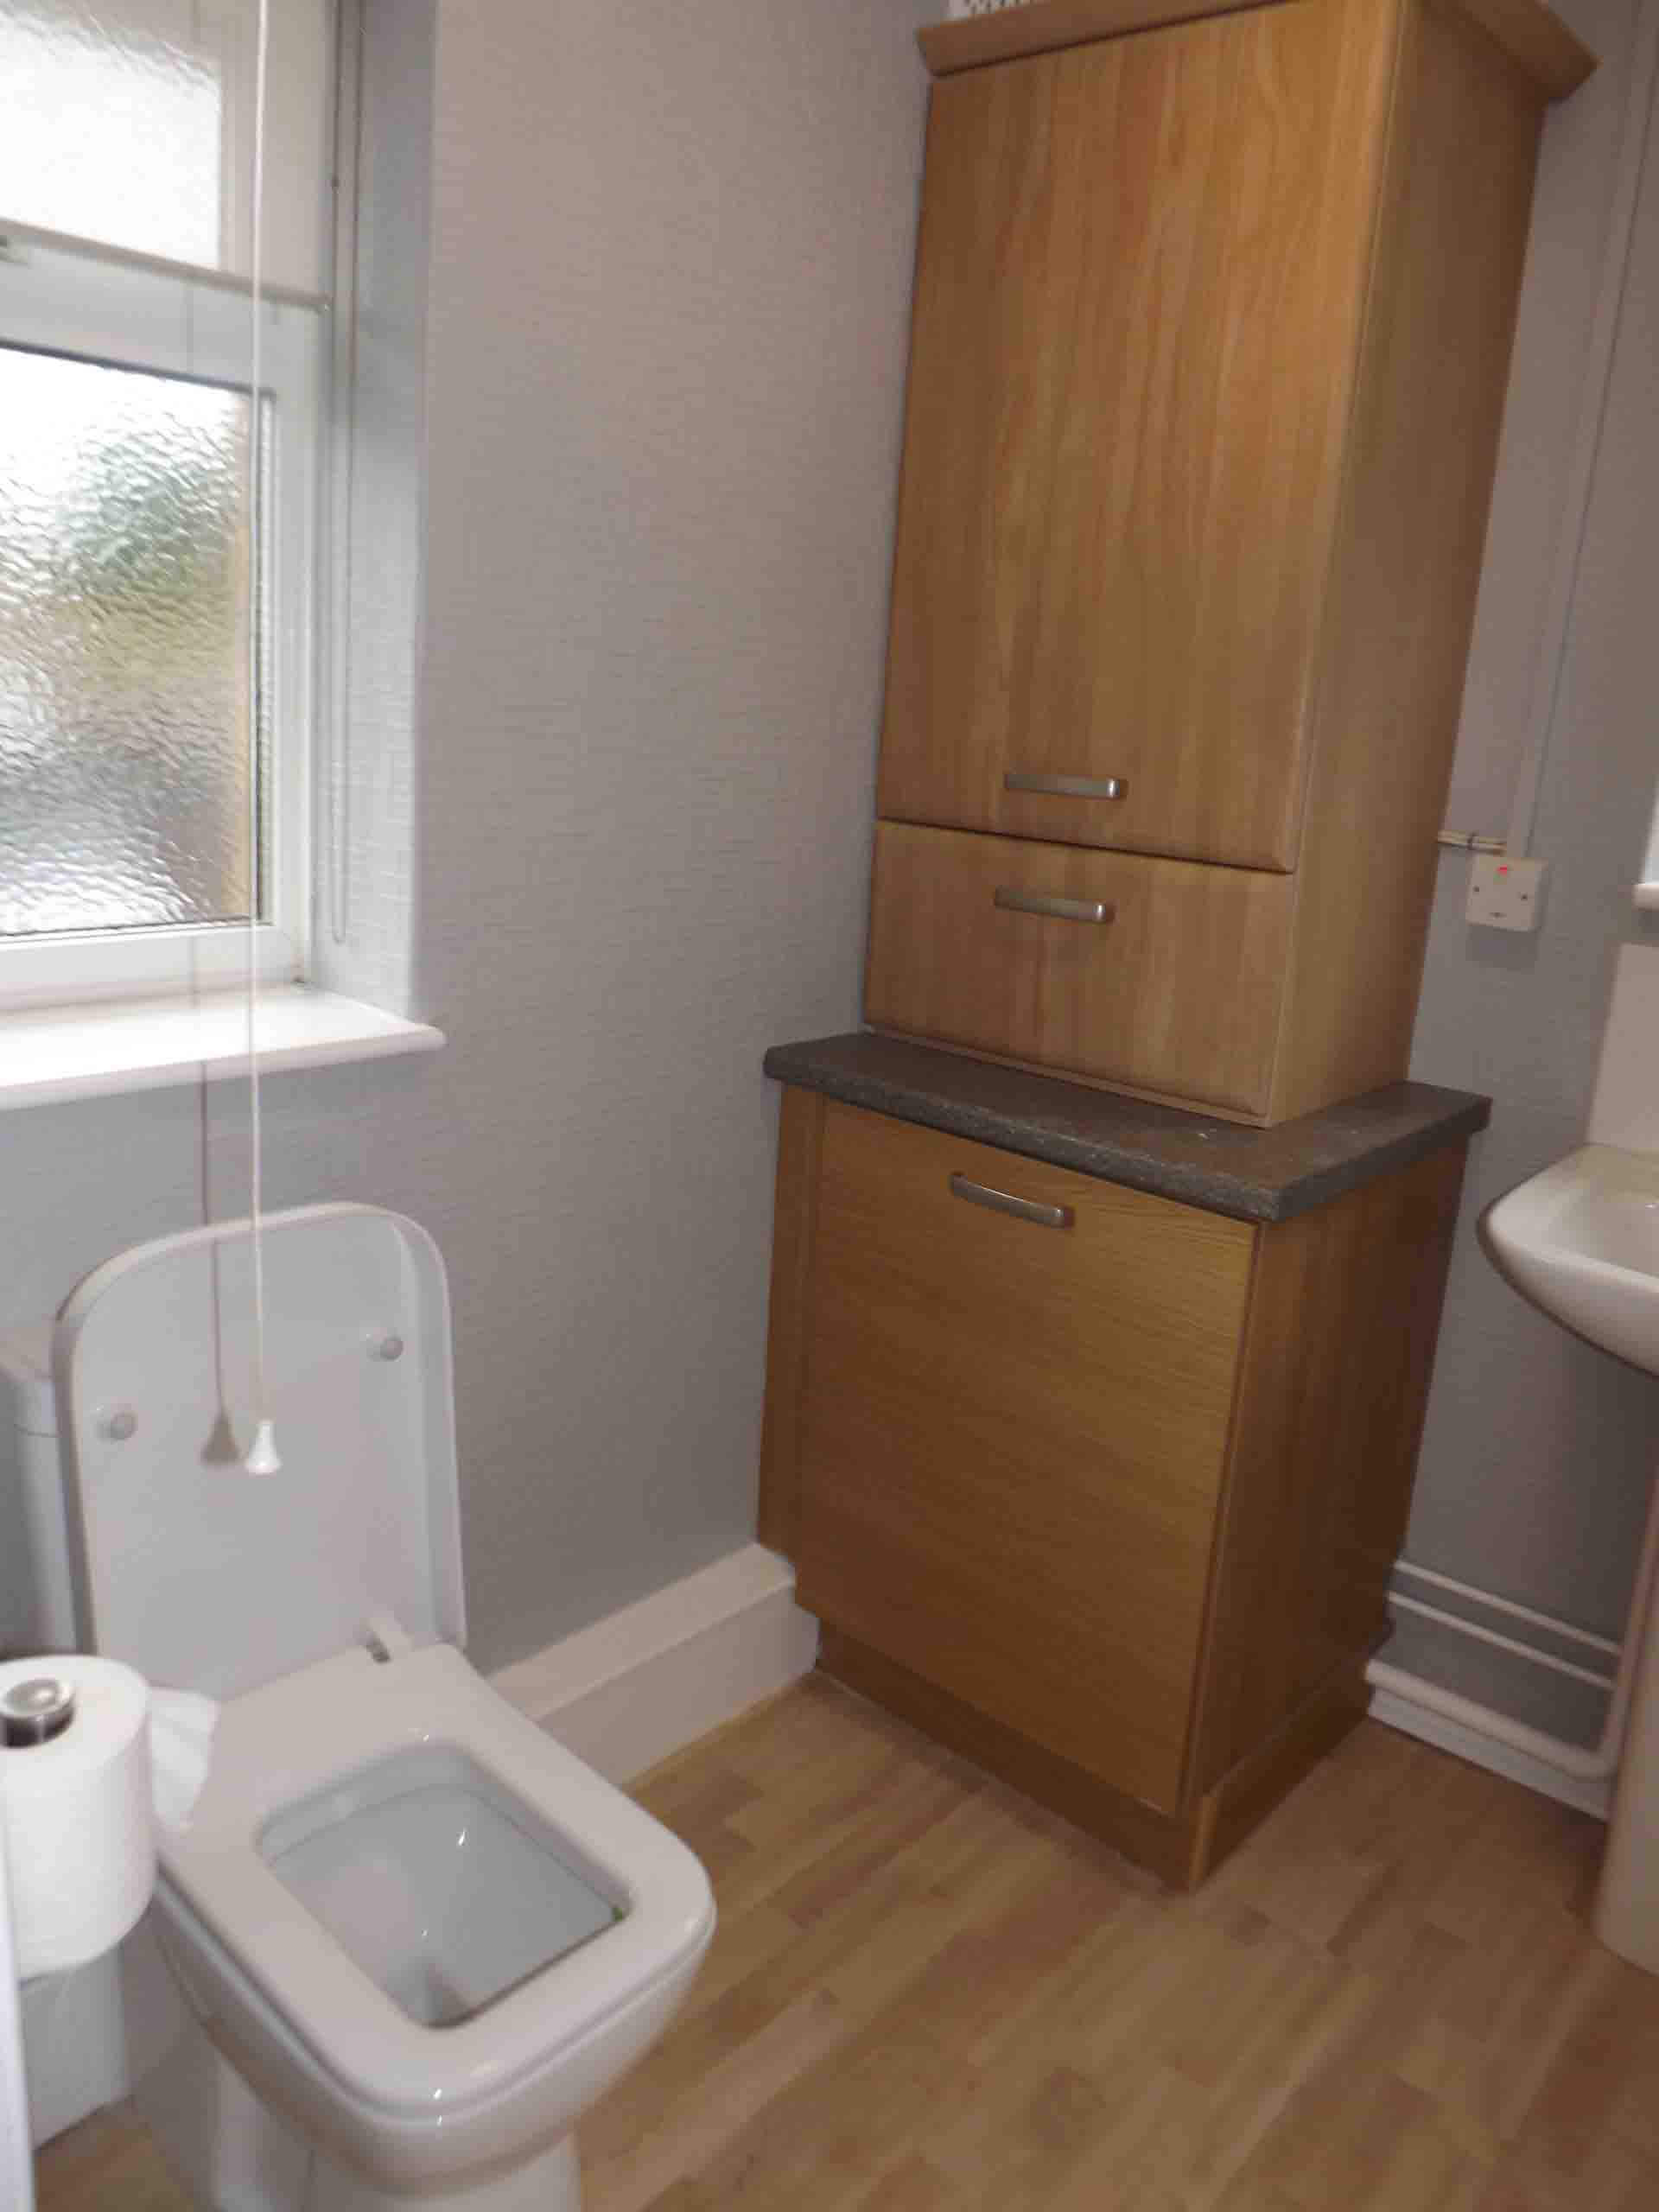 image of bathroom with toilet